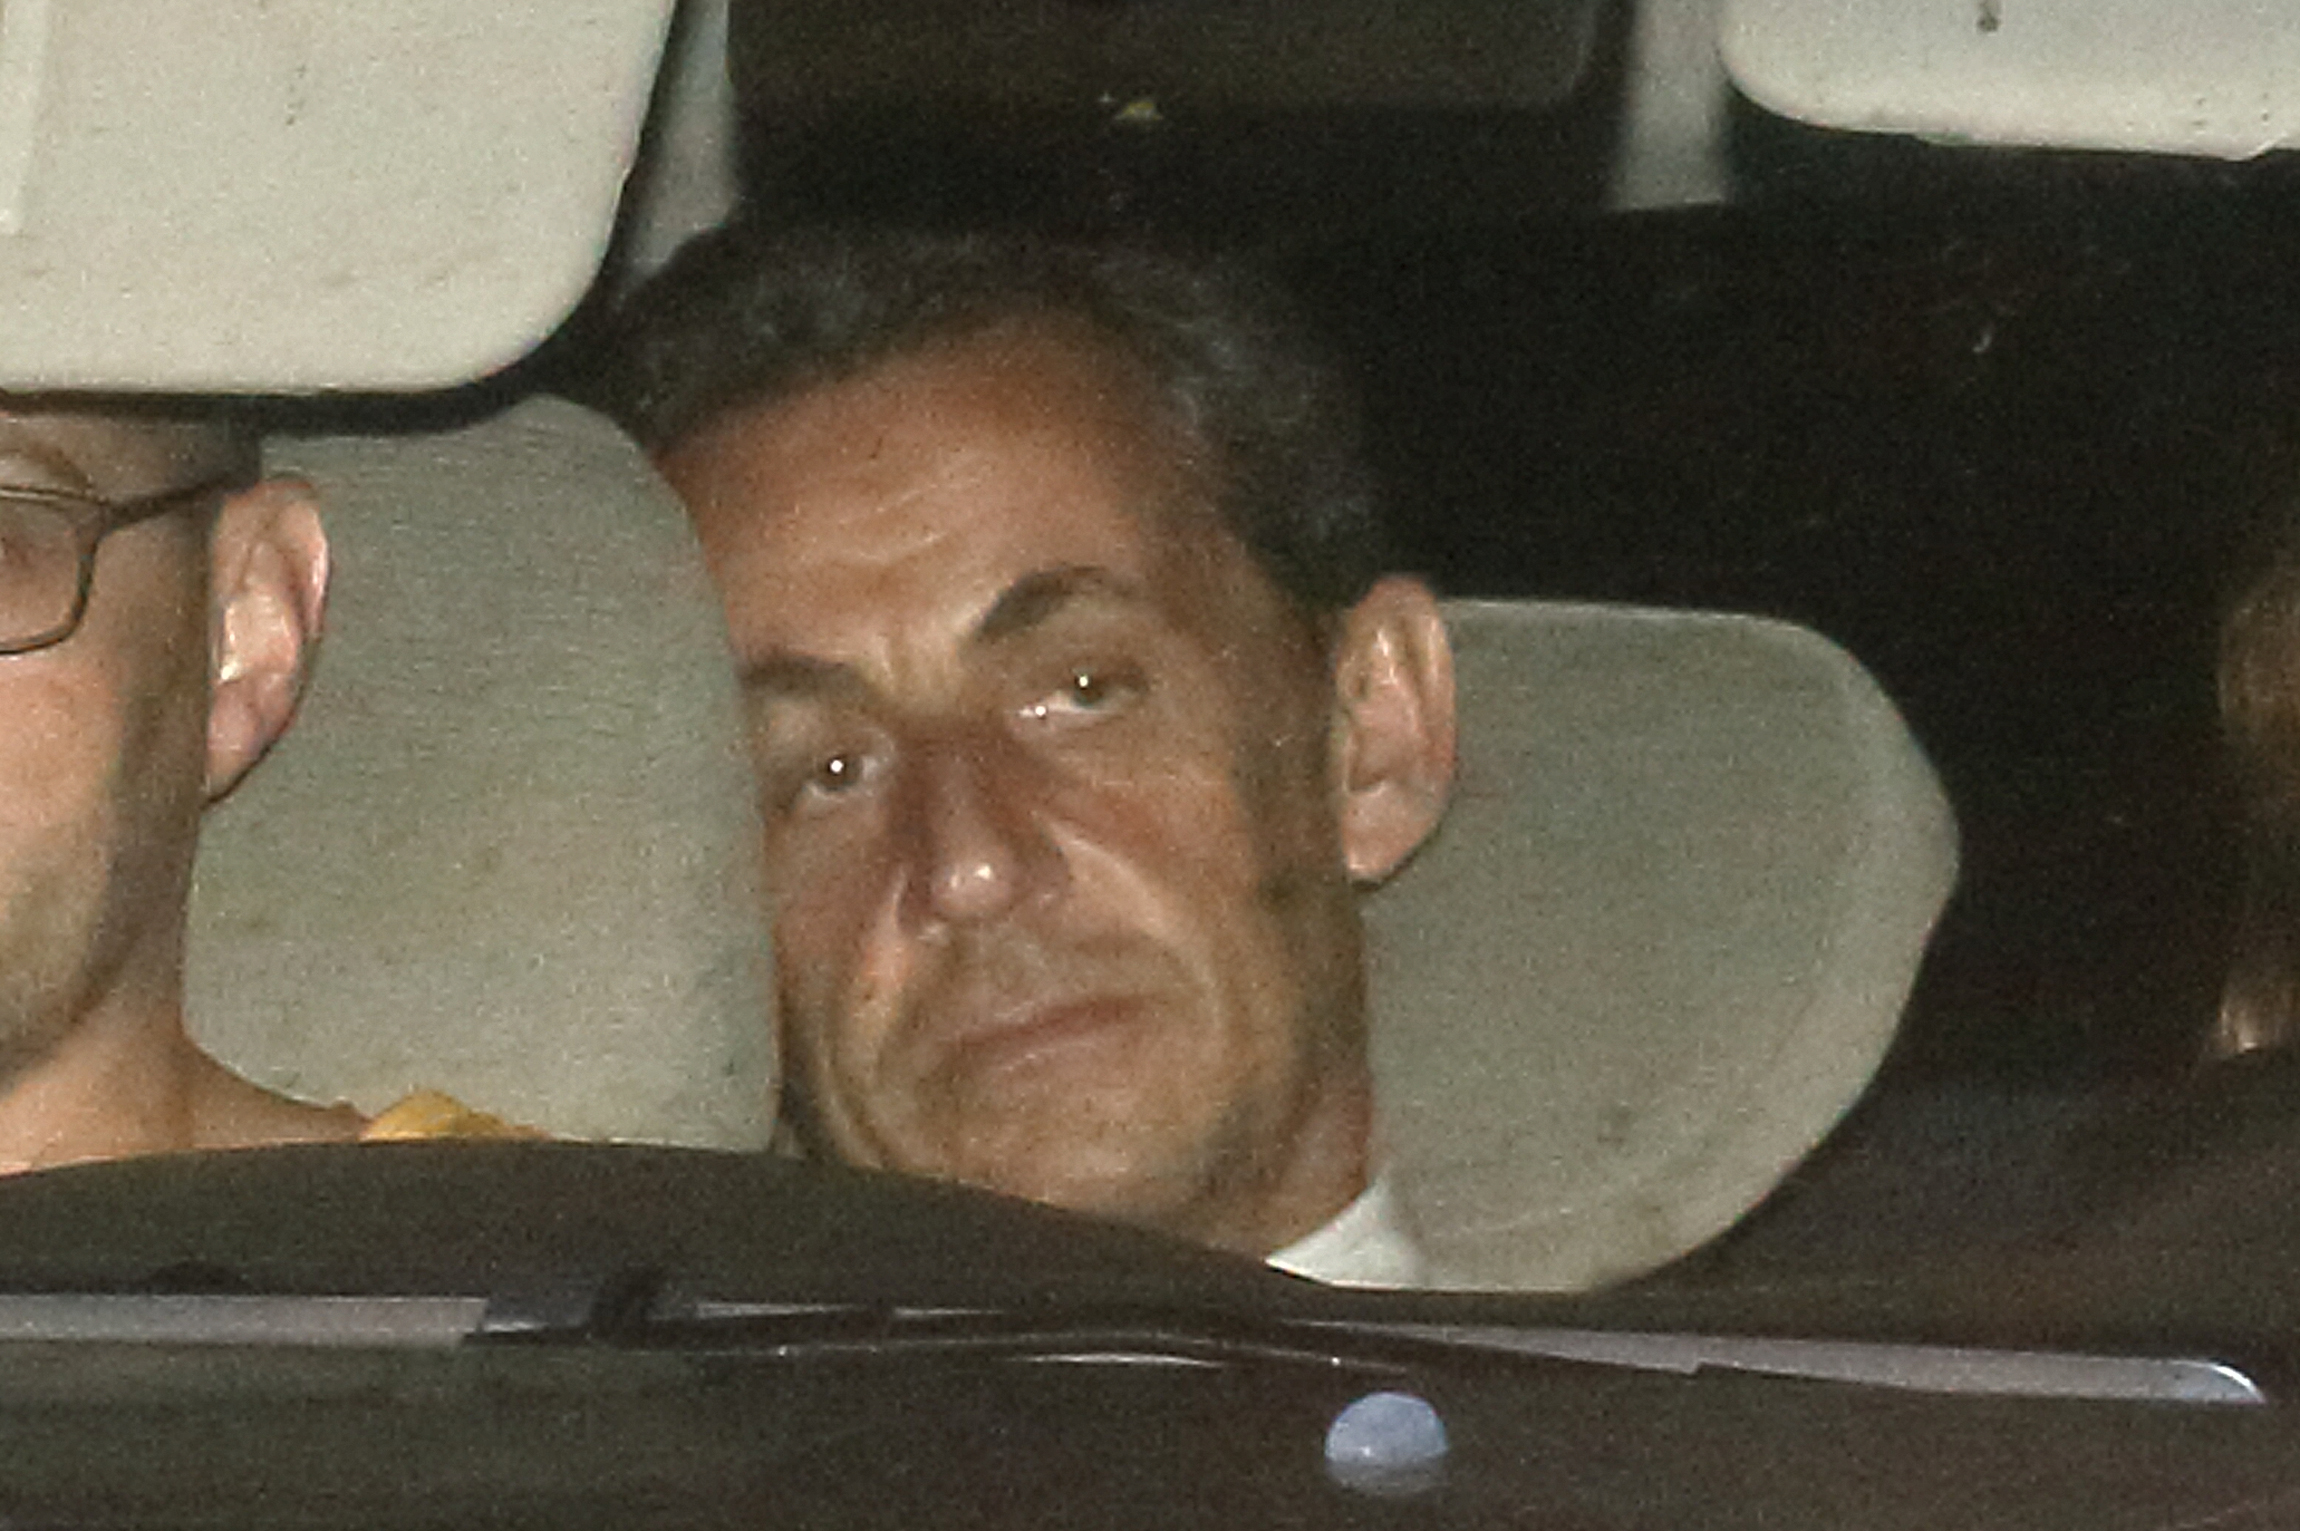 Former French President Nicolas Sarkozy arrives with police by car at the financial investigation unit in Paris to be presented to a judge late July 1, 2014. Former French President Sarkozy was held for questioning for 15 hours on Tuesday over suspicions he used his influence to secure leaked details of an inquiry into alleged irregularities in his 2007 election campaign. (Pascal Rossignol—Reuters)